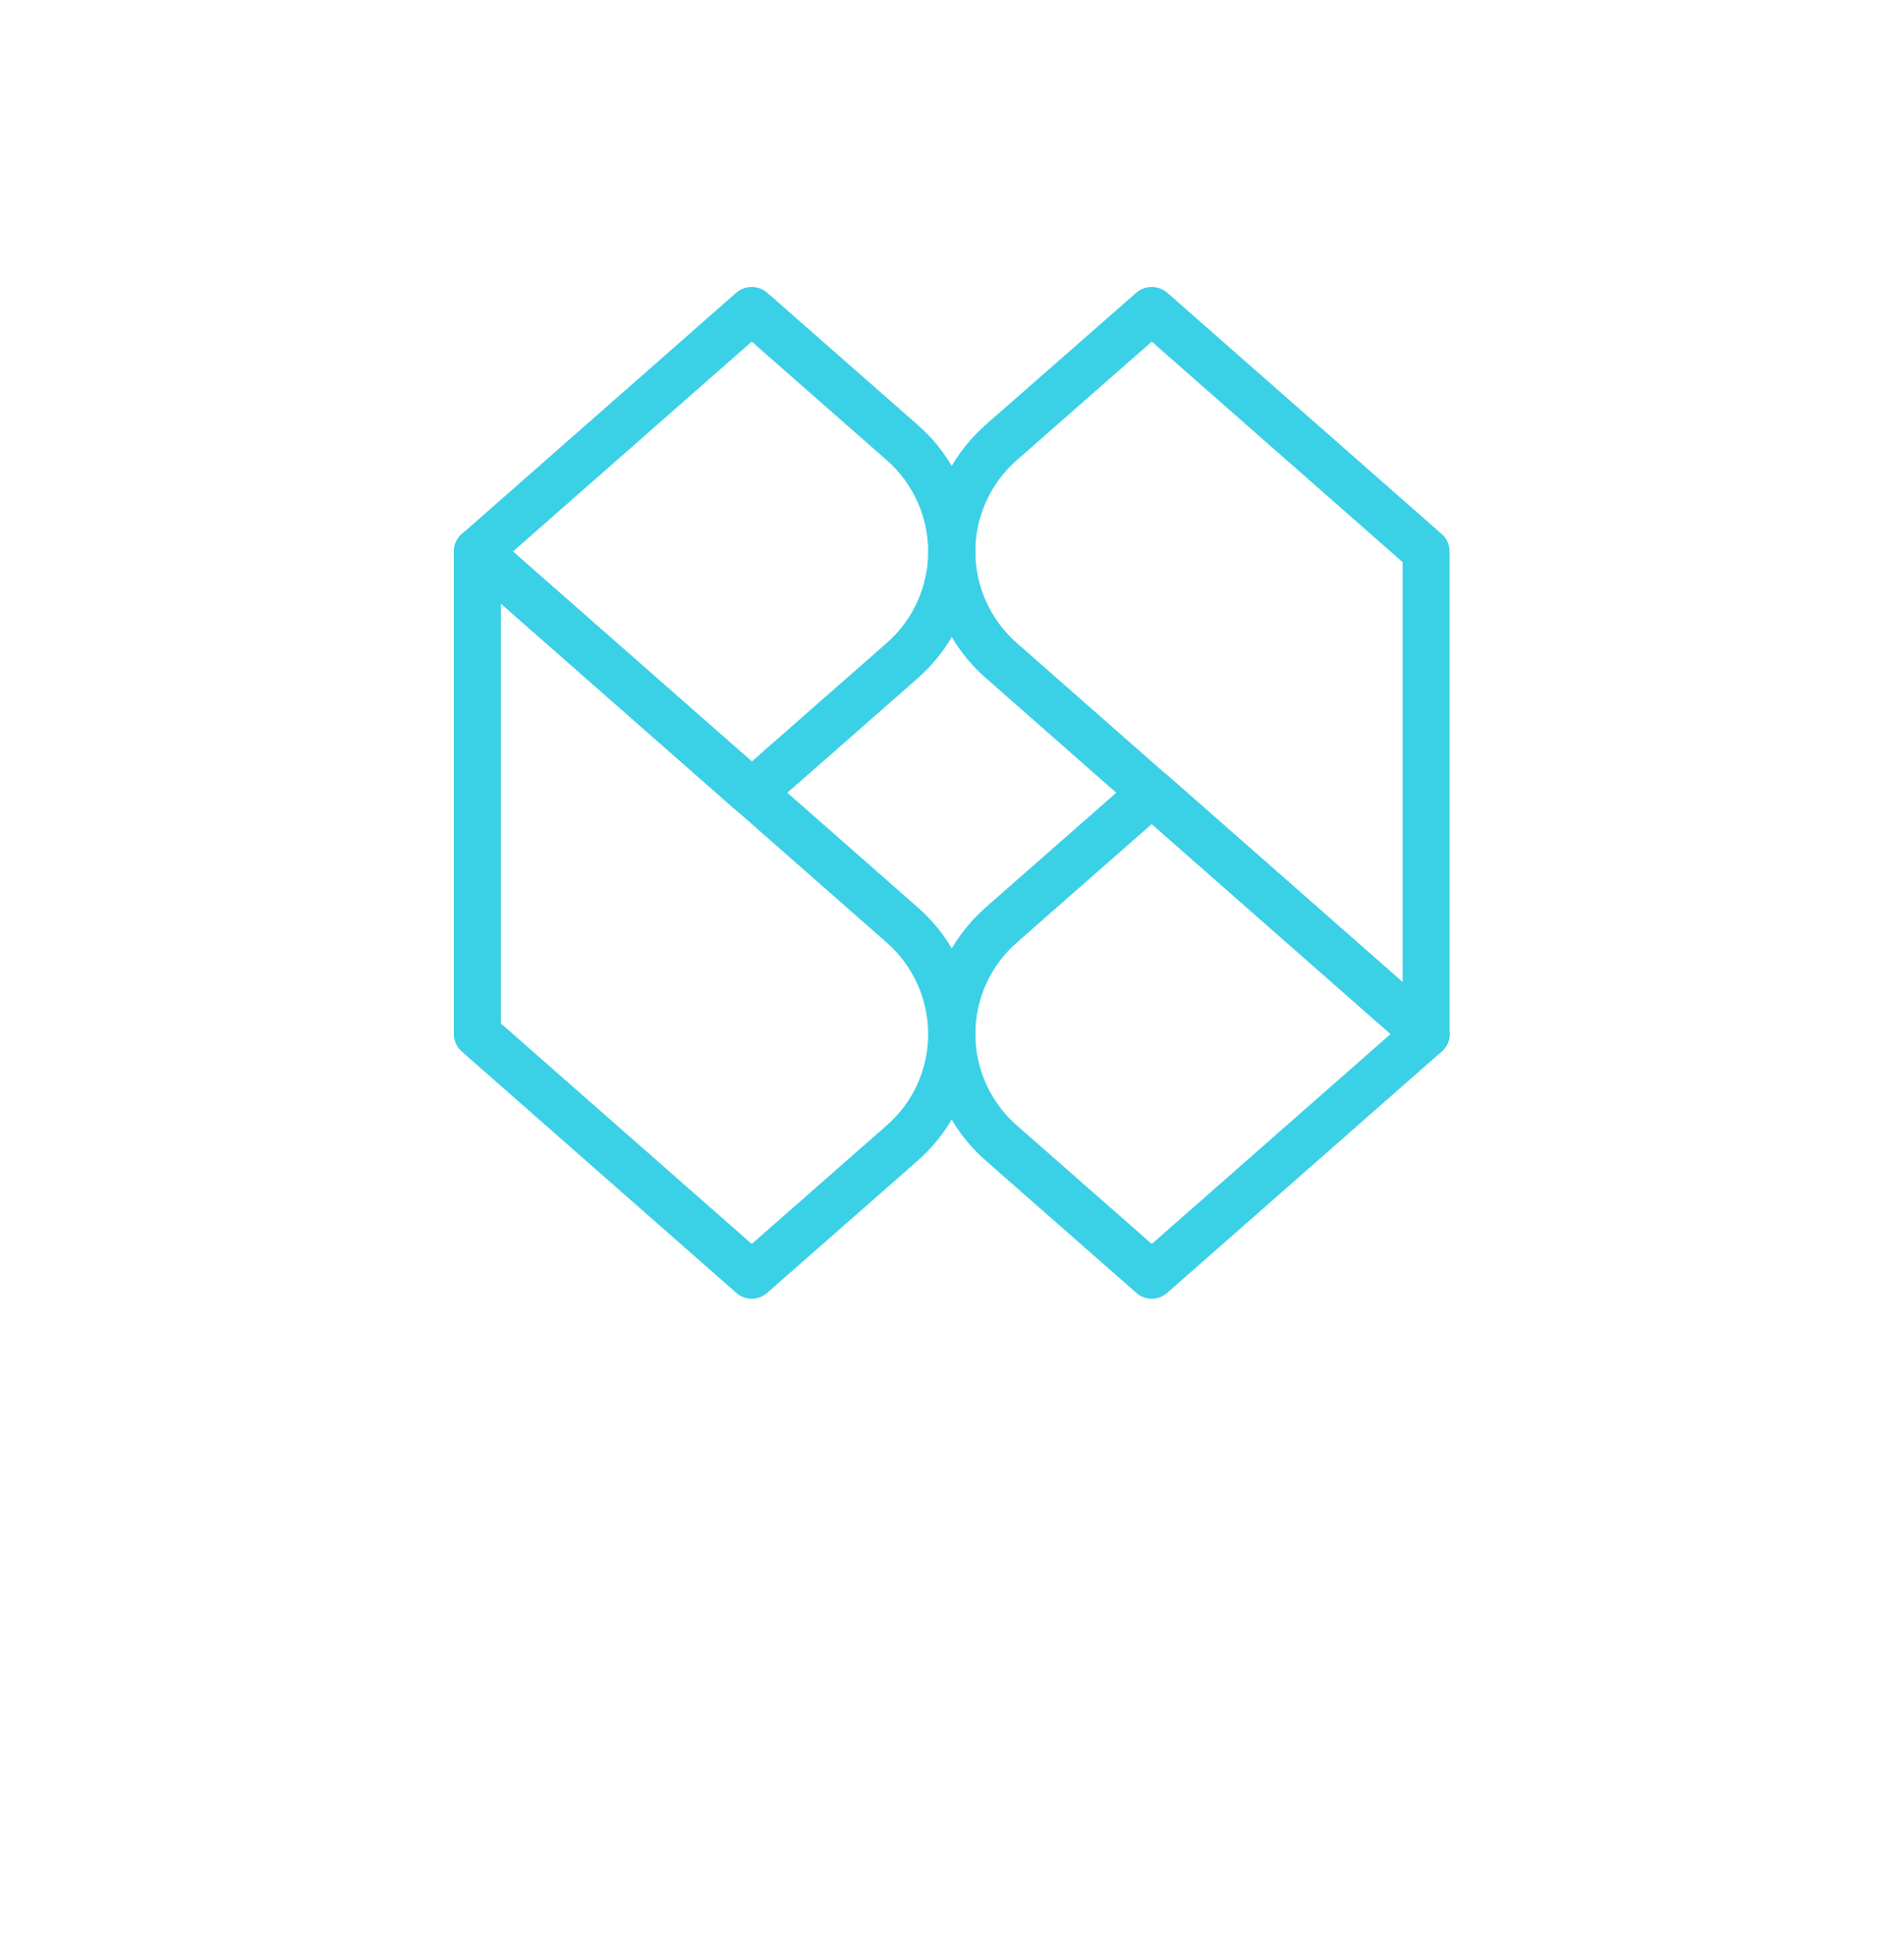 MIMIC logo with text